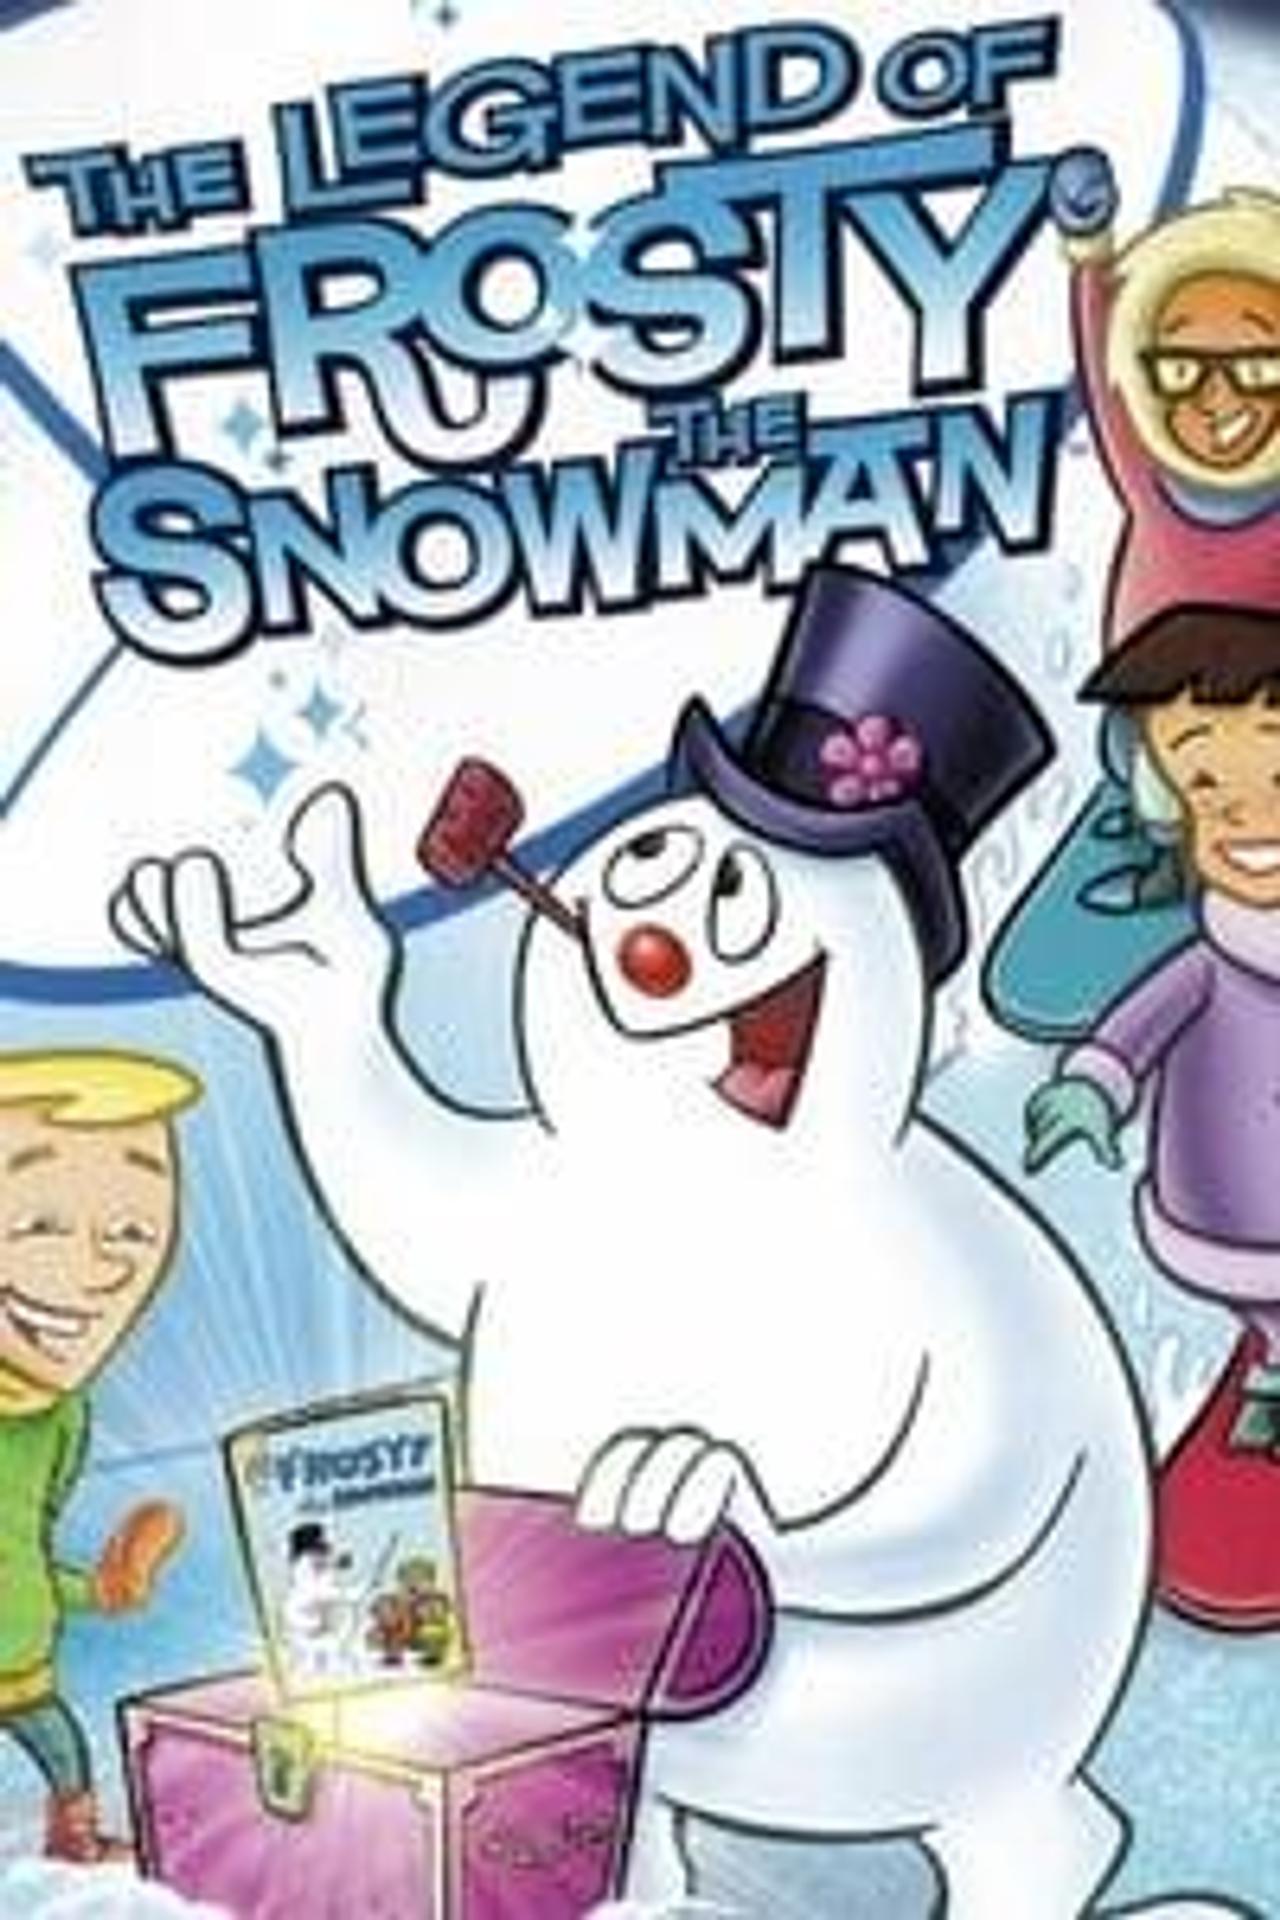 devon cromwell recommends watch frosty the snowman online pic